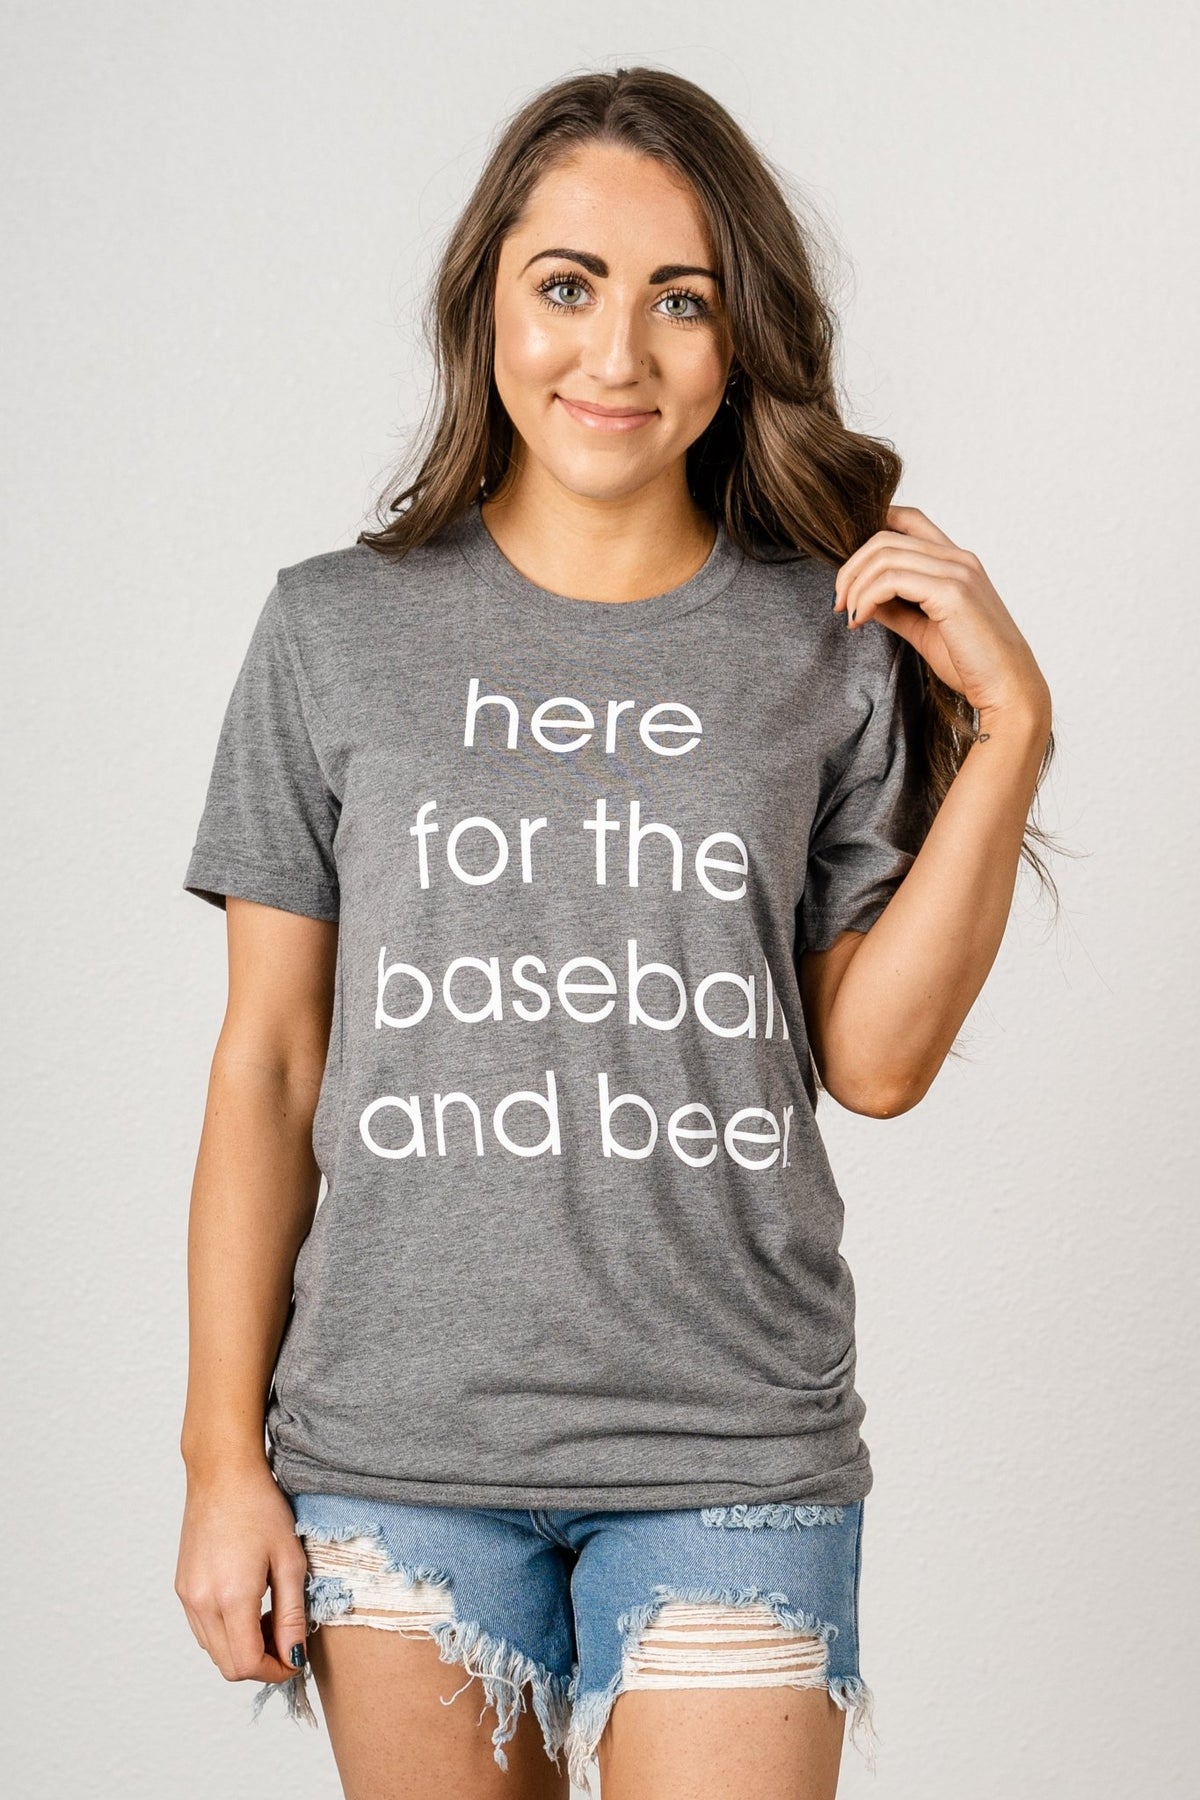 Here for the baseball & beer unisex short sleeve t-shirt grey - Stylish T-shirts - Trendy Graphic T-Shirts and Tank Tops at Lush Fashion Lounge Boutique in Oklahoma City